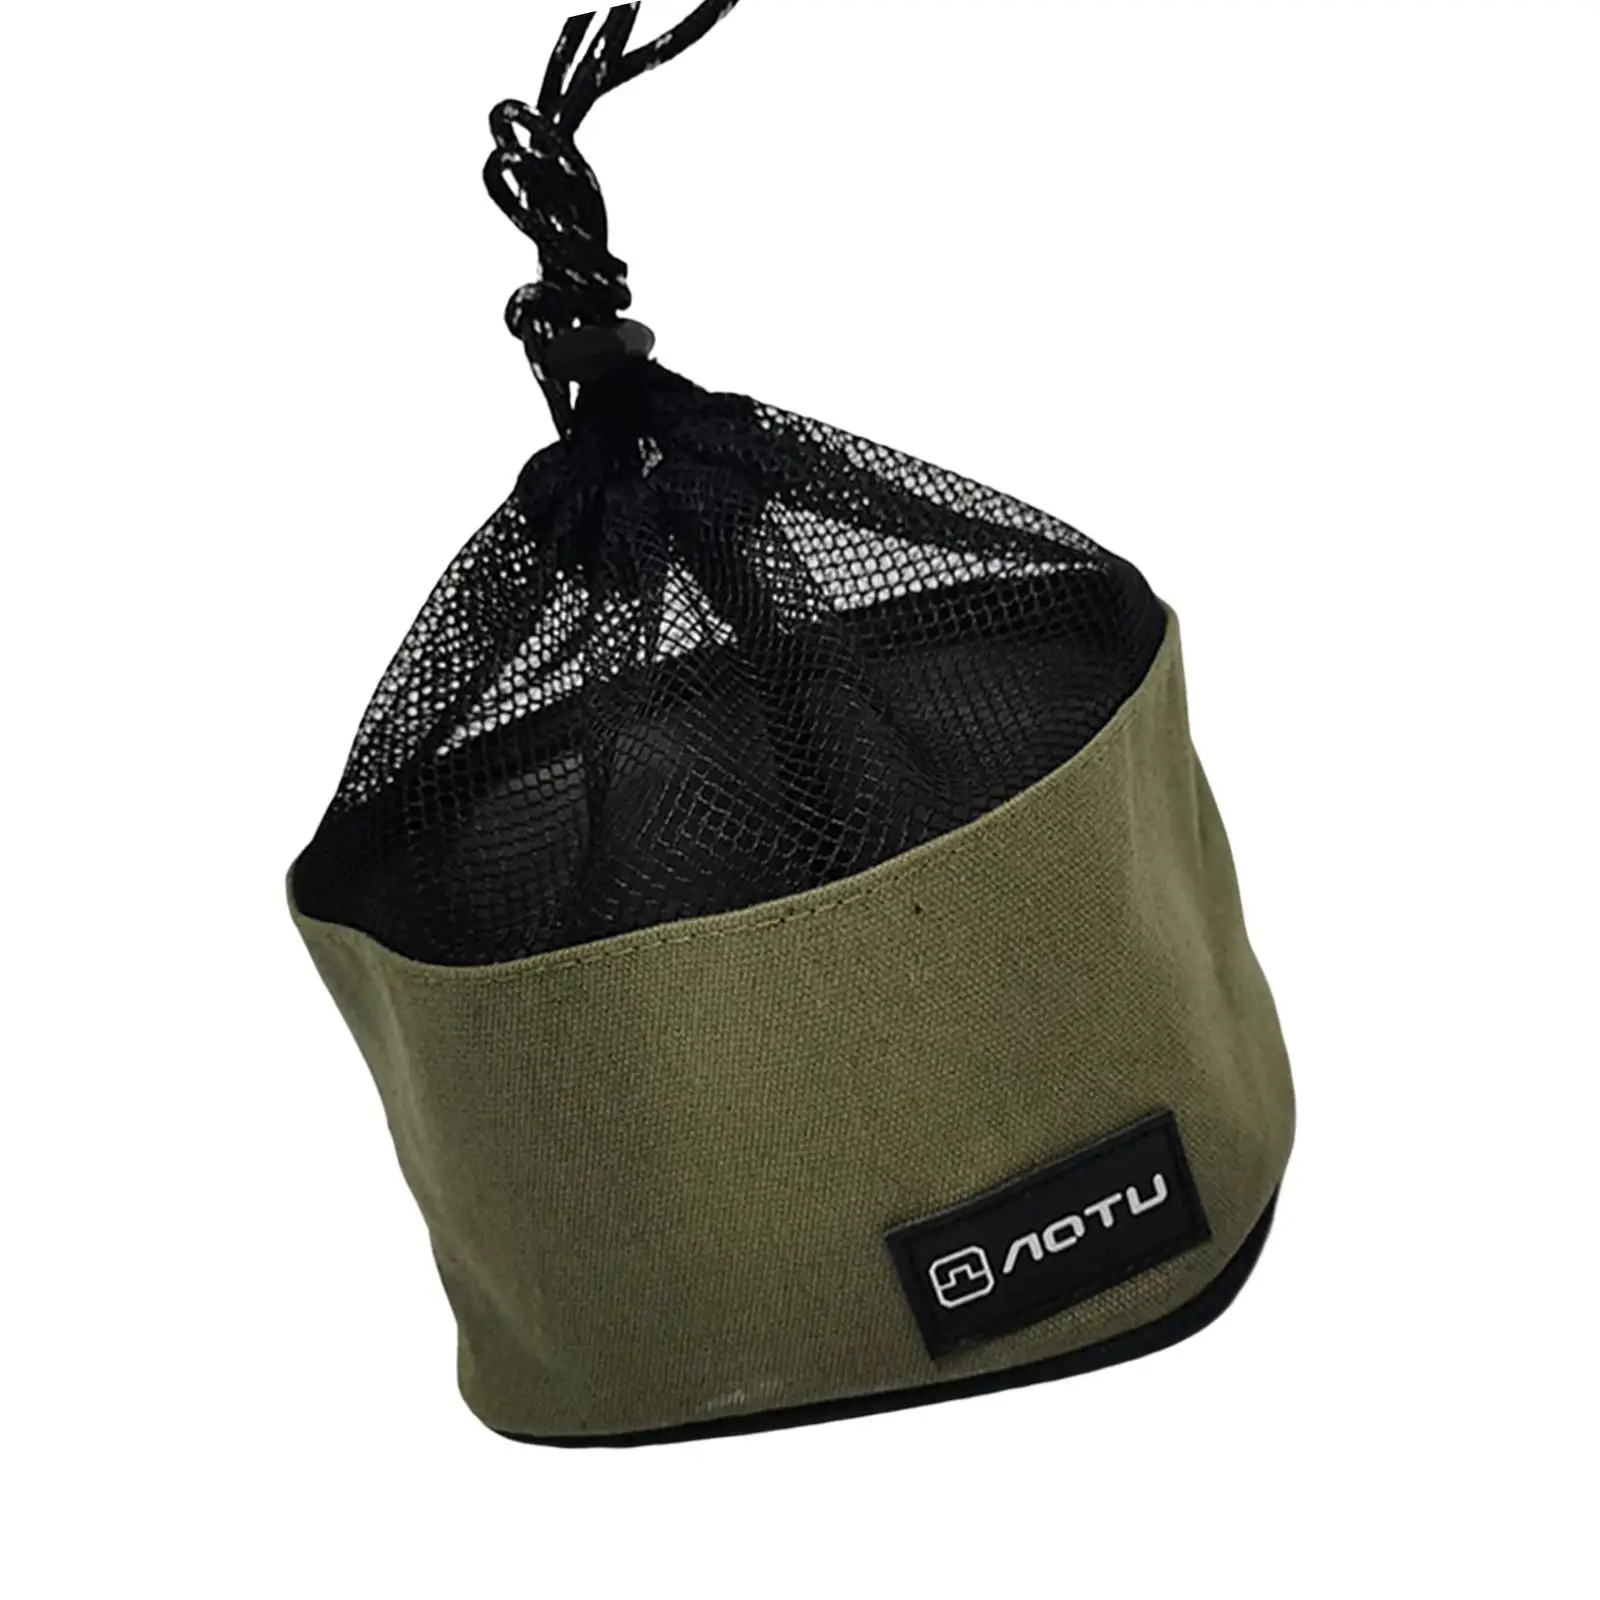 Portable Camping Cooking Utensils Pouch Drawstring Bag Case Accessories Carrier